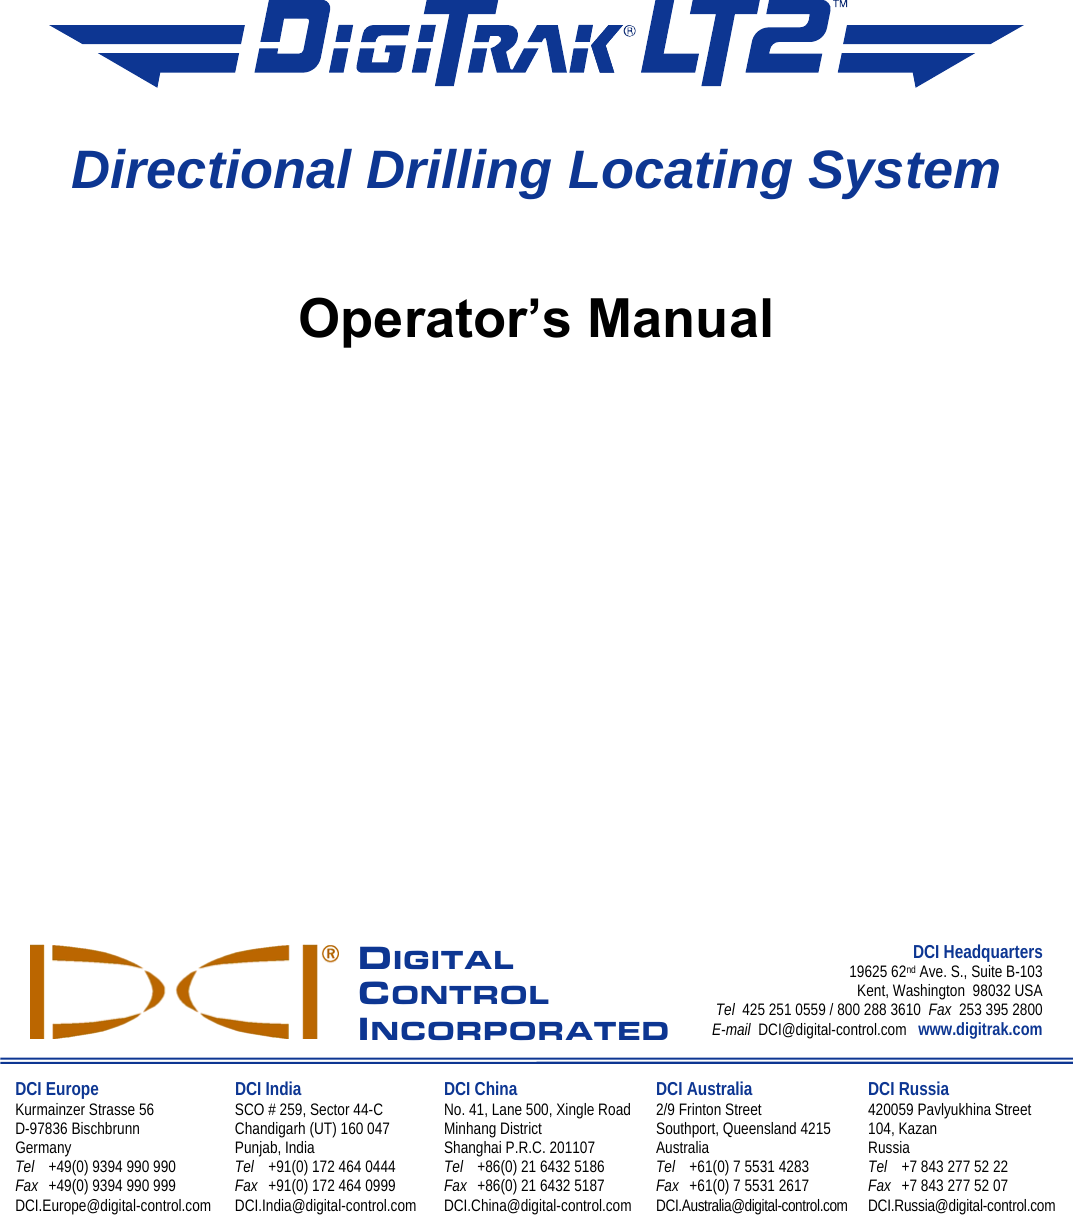         Directional Drilling Locating System  Operator’s Manual                  DIGITAL CONTROL INCORPORATED DCI Headquarters19625 62nd Ave. S., Suite B-103Kent, Washington  98032 USATel  425 251 0559 / 800 288 3610  Fax  253 395 2800E-mail  DCI@digital-control.com  www.digitrak.com DCI Europe Kurmainzer Strasse 56 D-97836 Bischbrunn  Germany Tel  +49(0) 9394 990 990 Fax  +49(0) 9394 990 999 DCI.Europe@digital-control.com  DCI India SCO # 259, Sector 44-C Chandigarh (UT) 160 047 Punjab, India Tel  +91(0) 172 464 0444 Fax  +91(0) 172 464 0999 DCI.India@digital-control.com DCI China No. 41, Lane 500, Xingle RoadMinhang District Shanghai P.R.C. 201107  Tel  +86(0) 21 6432 5186 Fax  +86(0) 21 6432 5187 DCI.China@digital-control.com DCI Australia 2/9 Frinton Street Southport, Queensland 4215 Australia Tel  +61(0) 7 5531 4283 Fax  +61(0) 7 5531 2617 DCI.Australia@digital-control.com DCI Russia 420059 Pavlyukhina Street  104, Kazan Russia Tel  +7 843 277 52 22 Fax  +7 843 277 52 07 DCI.Russia@digital-control.com    